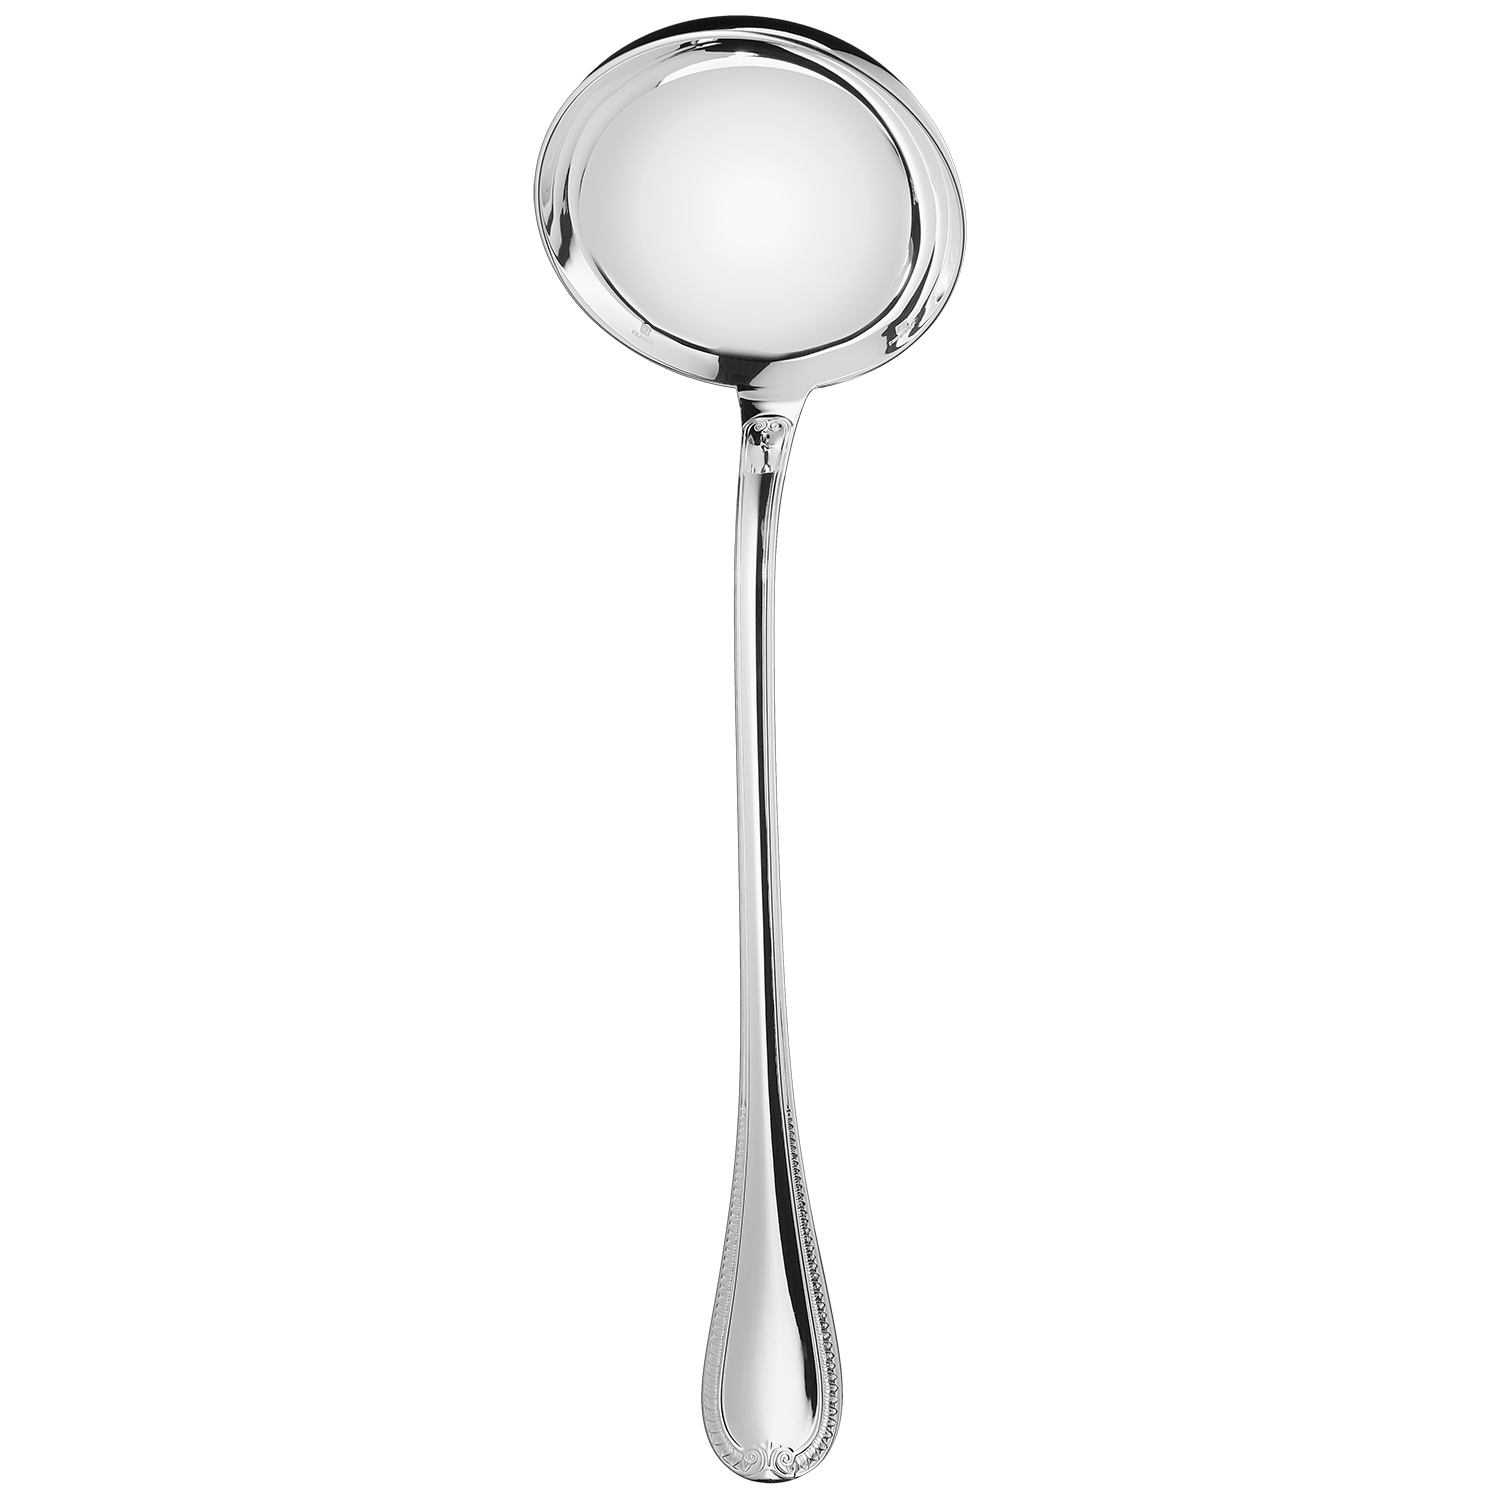 Silver-Plated soup ladle